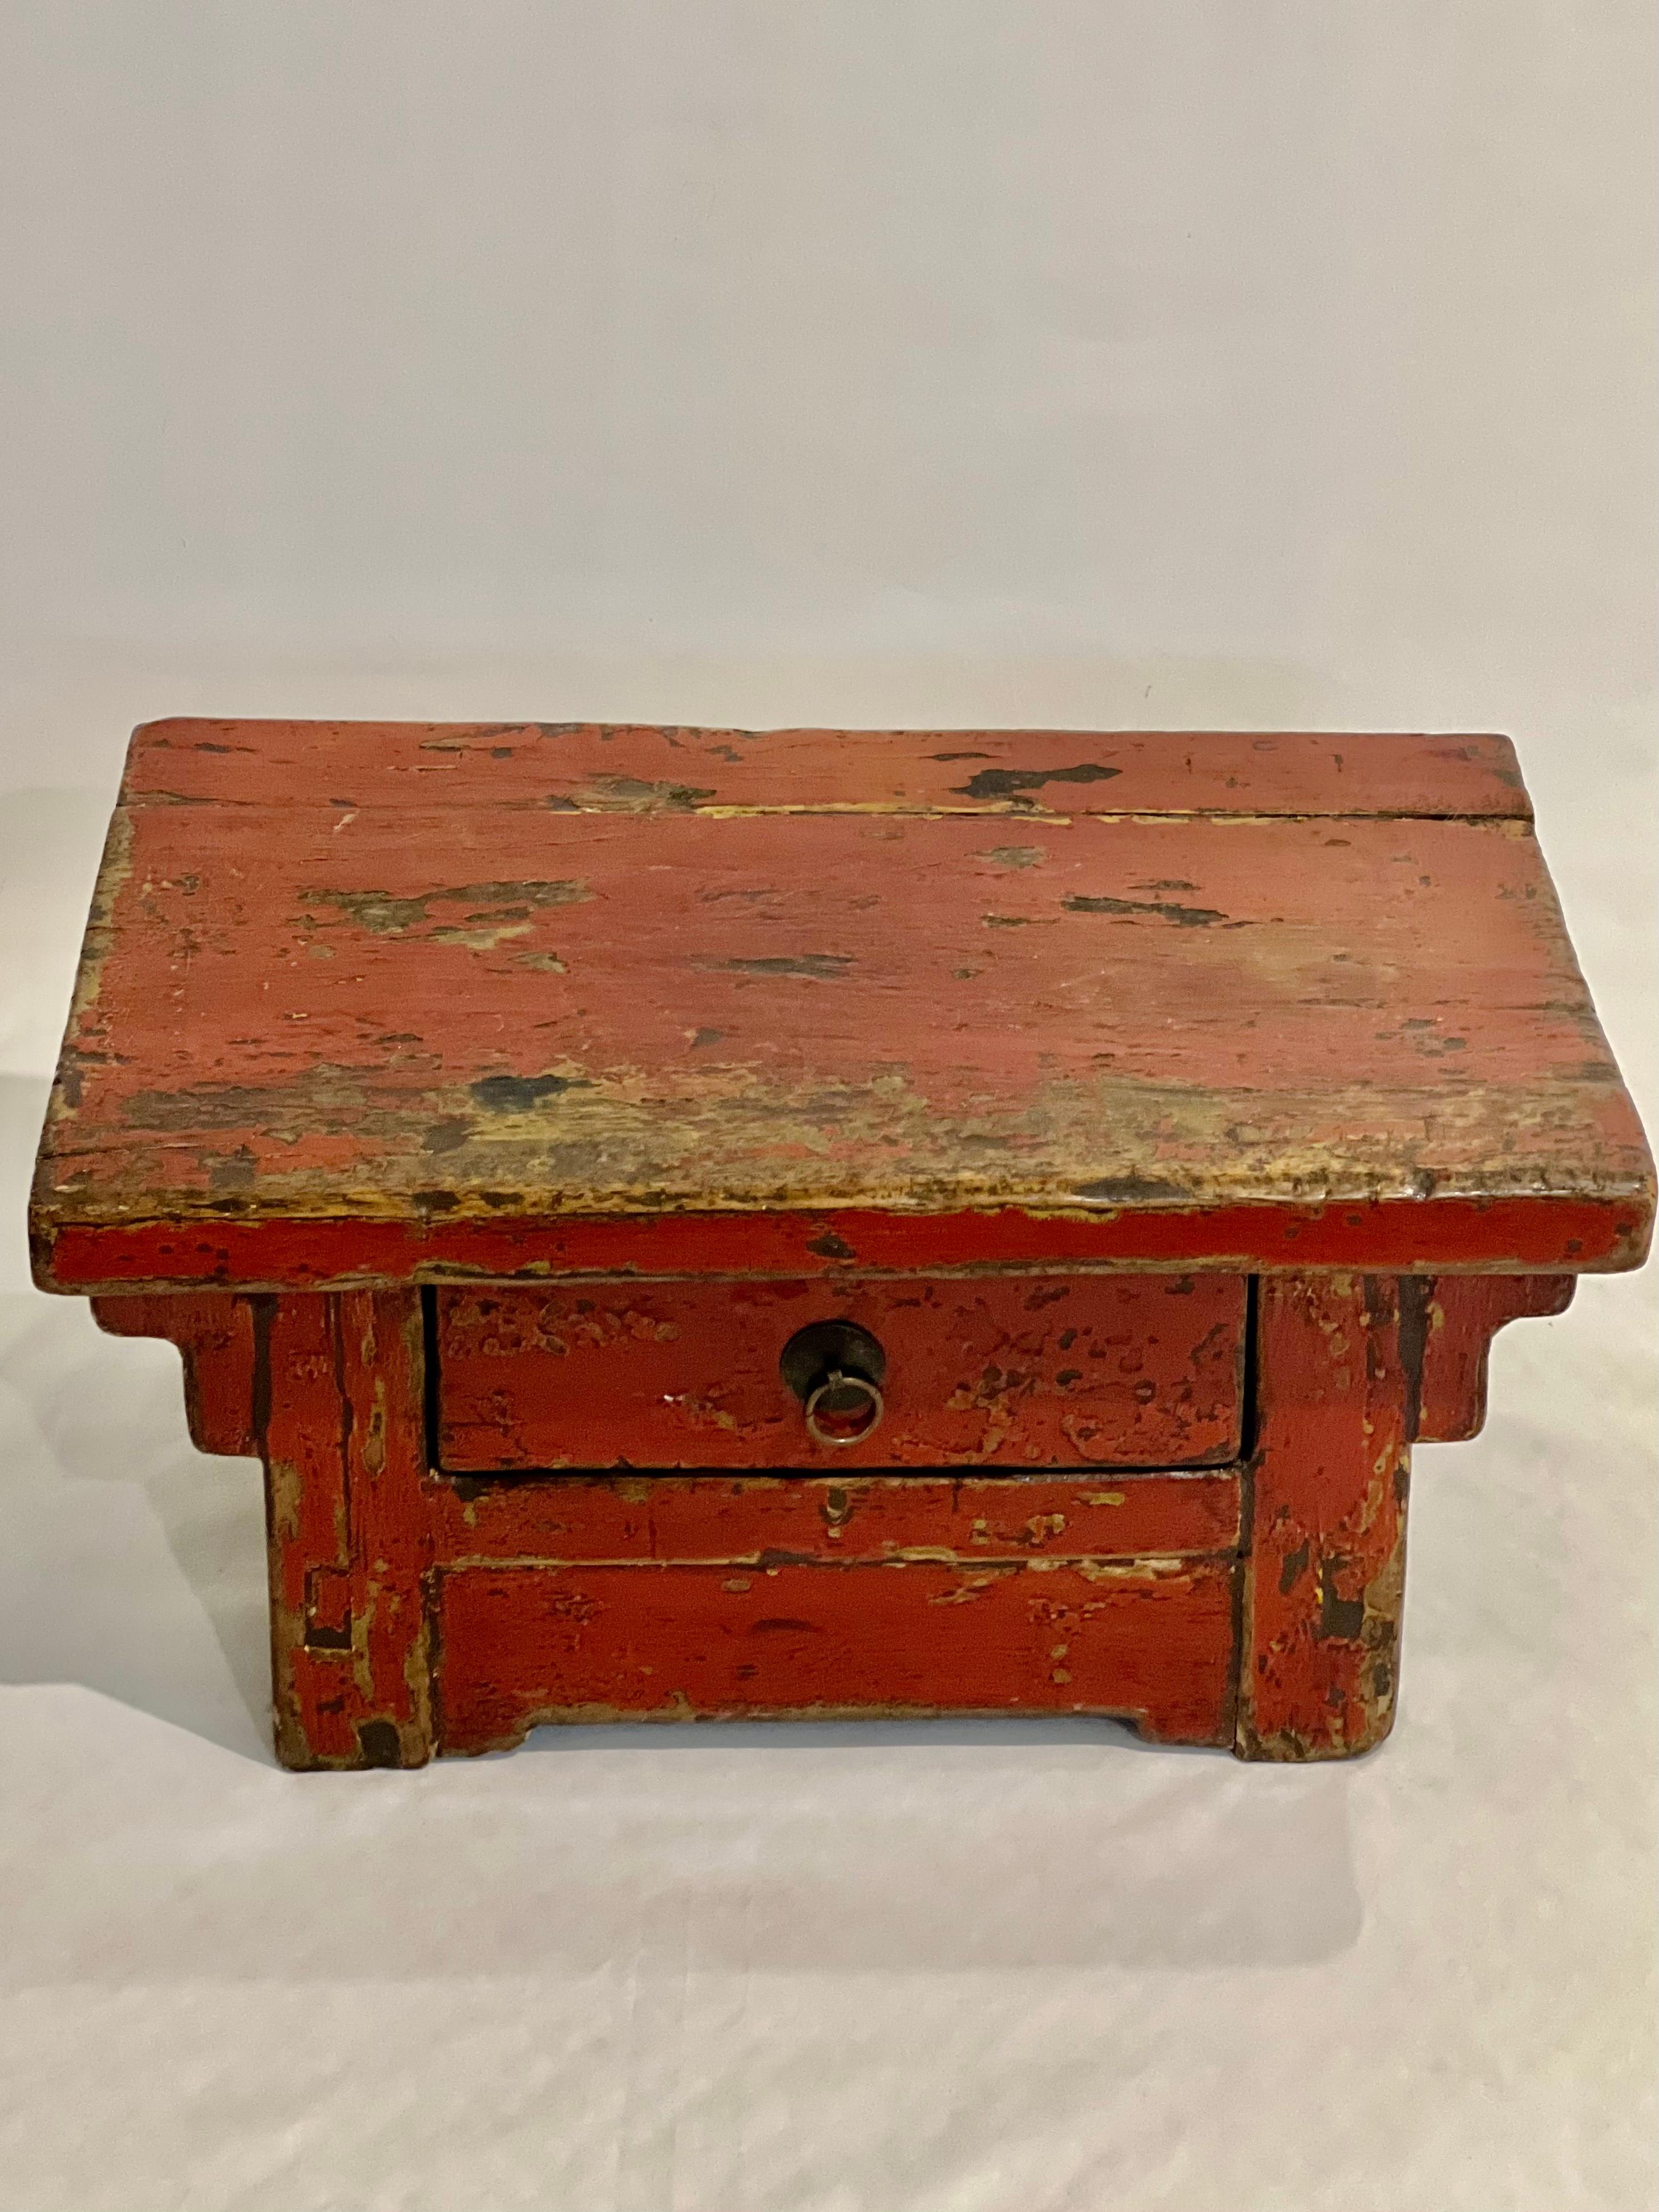 19th century Chinese Ming style red lacquered low tea table.

A finely crafted, petite elm table featuring a single drawer with a brass ring pull. In great vintage condition with fantastic aged patina in a richly hued red lacquer. Originally an